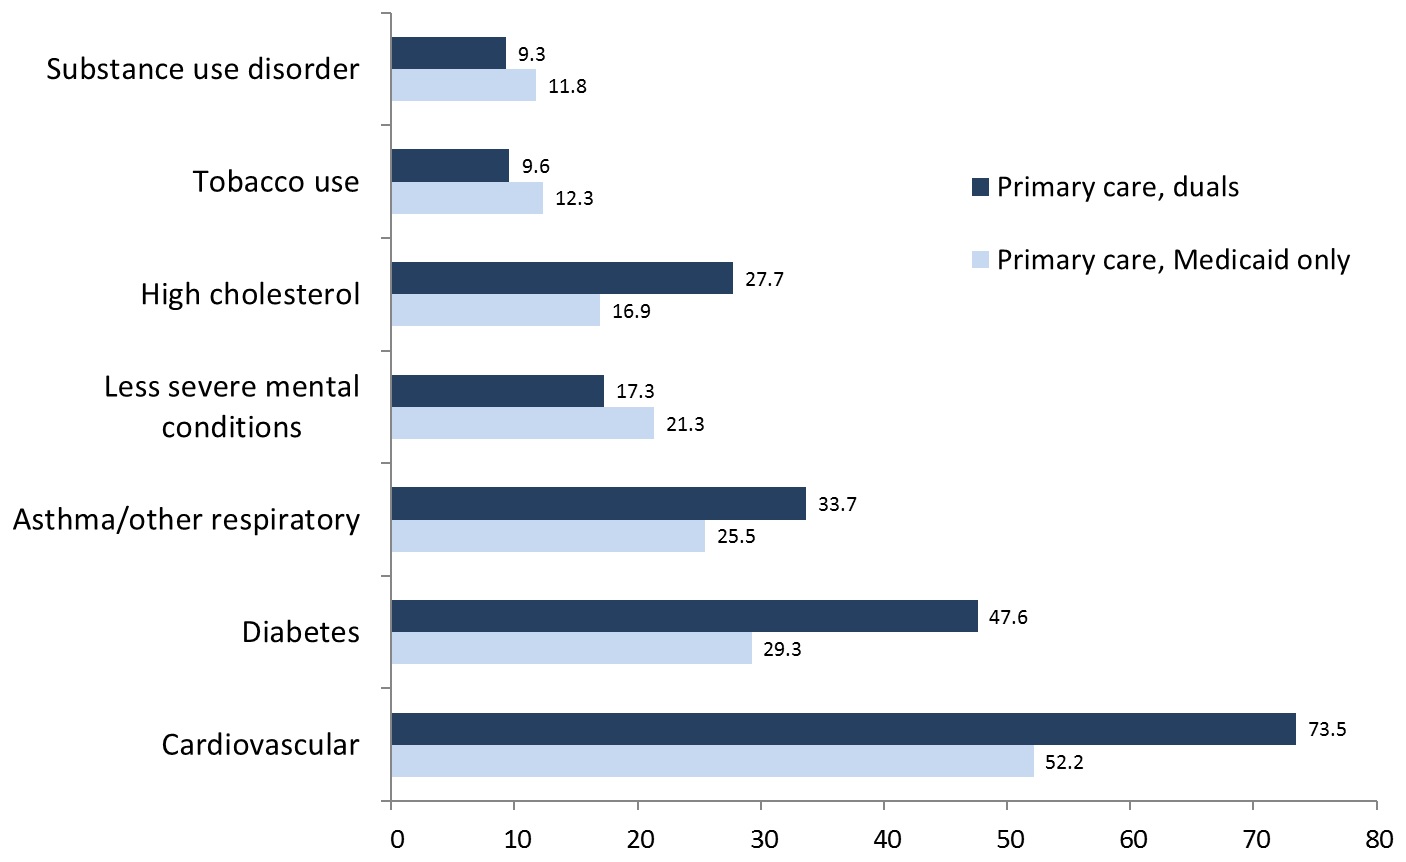 FIGURE 1, Bar Chart: Substance Use Disorder--Primary care, duals (9.3); Primary care, Medicaid only (11.8). Tobacco Use--Primary care, duals (9.6); Primary care, Medicaid only (12.3). High Cholesterol--Primary care, duals (27.7); Primary care, Medicaid only (16.9). Less Severe Mental Conditions--Primary care, duals (17.3); Primary care, Medicaid only (21.3). Asthma/Other Respiratory--Primary care, duals (33.7); Primary care, Medicaid only (25.5). Diabetes--Primary care, duals (47.6); Primary care, Medicaid only (29.3). Cardiovascular--Primary care, duals (73.5); Primary care, Medicaid only (52.2). 